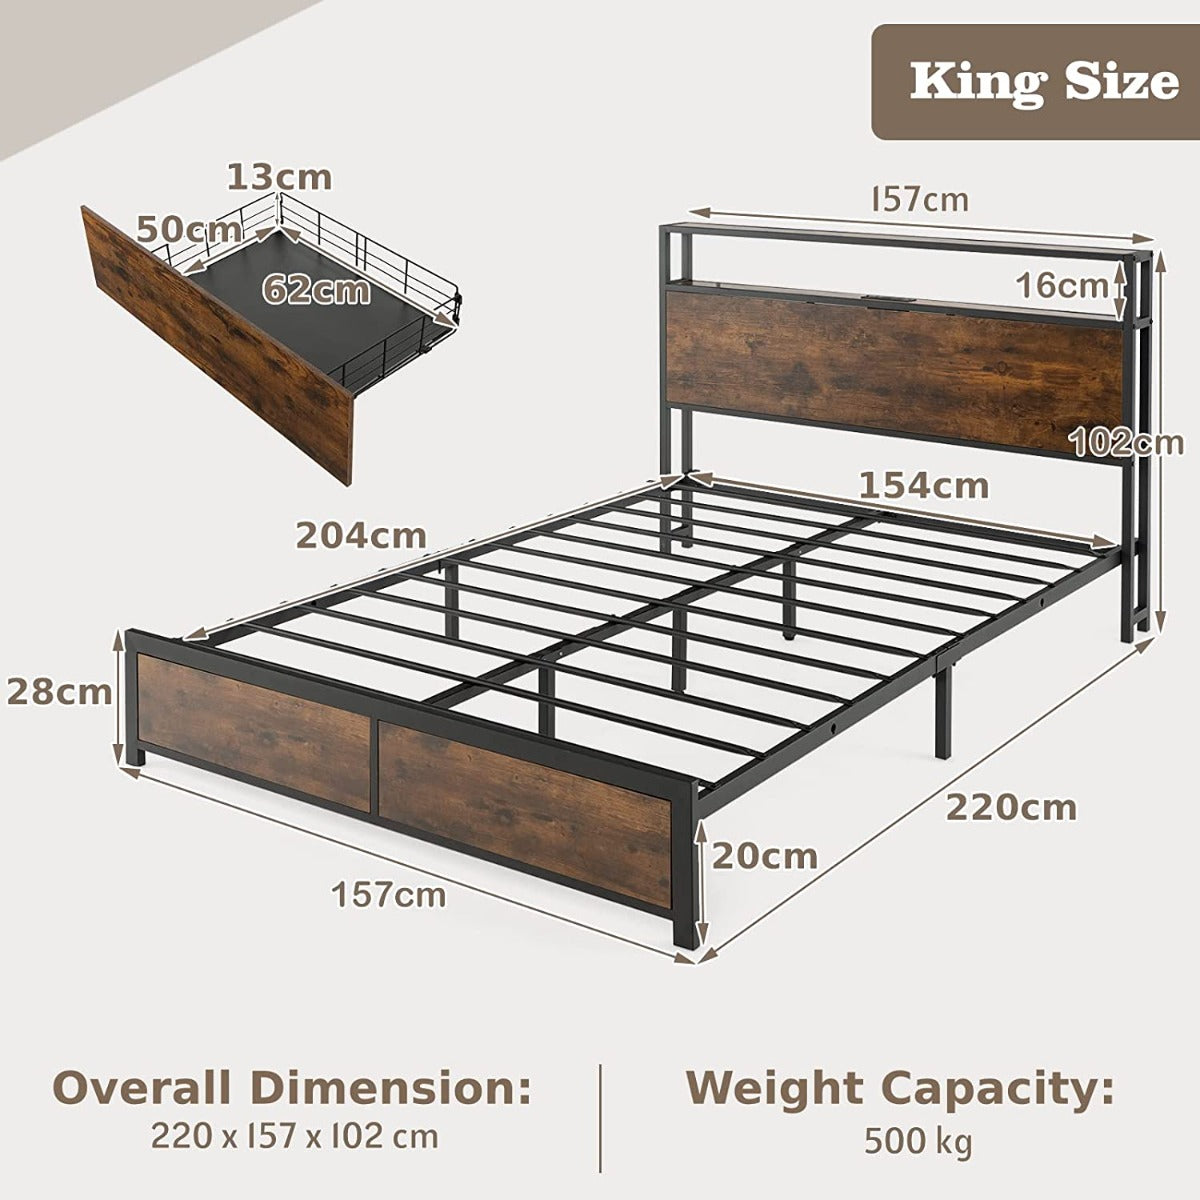 5 Feet King Size Metal Bed Frame with RGB LED Lights and Charging Station